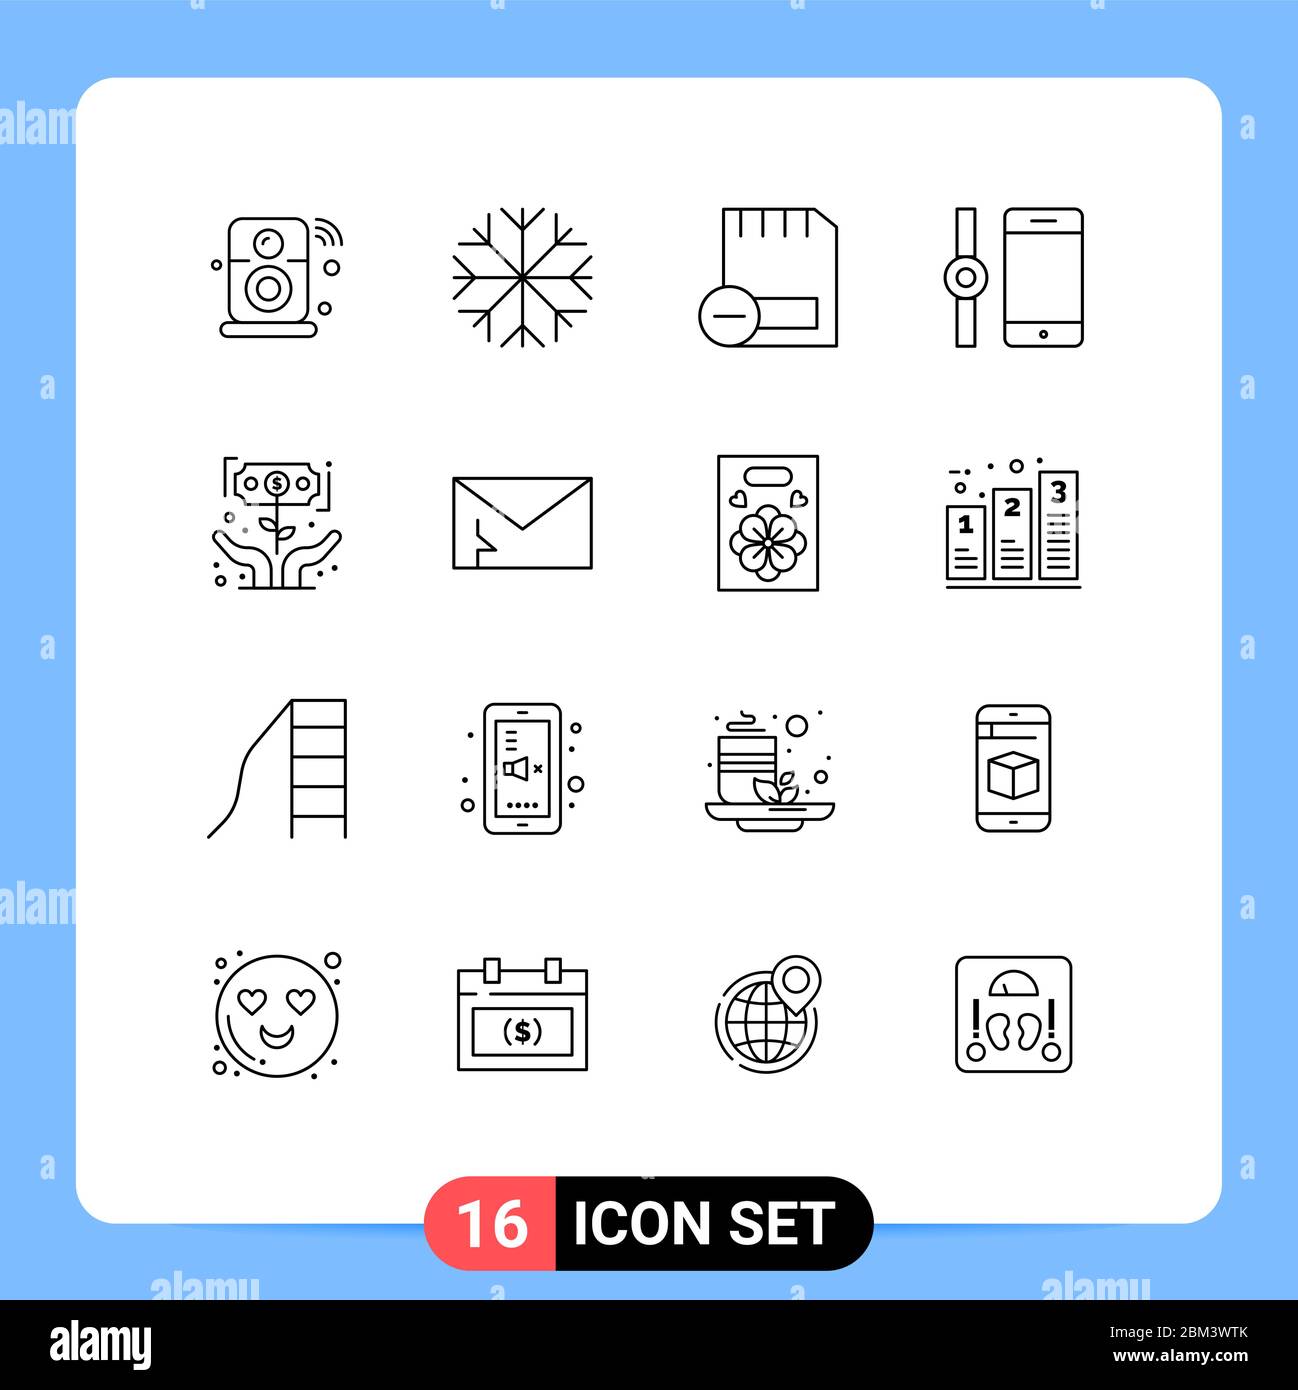 Mobile Interface Outline Set of 16 Pictograms of growth, smartphone, card, smart watch, remove Editable Vector Design Elements Stock Vector